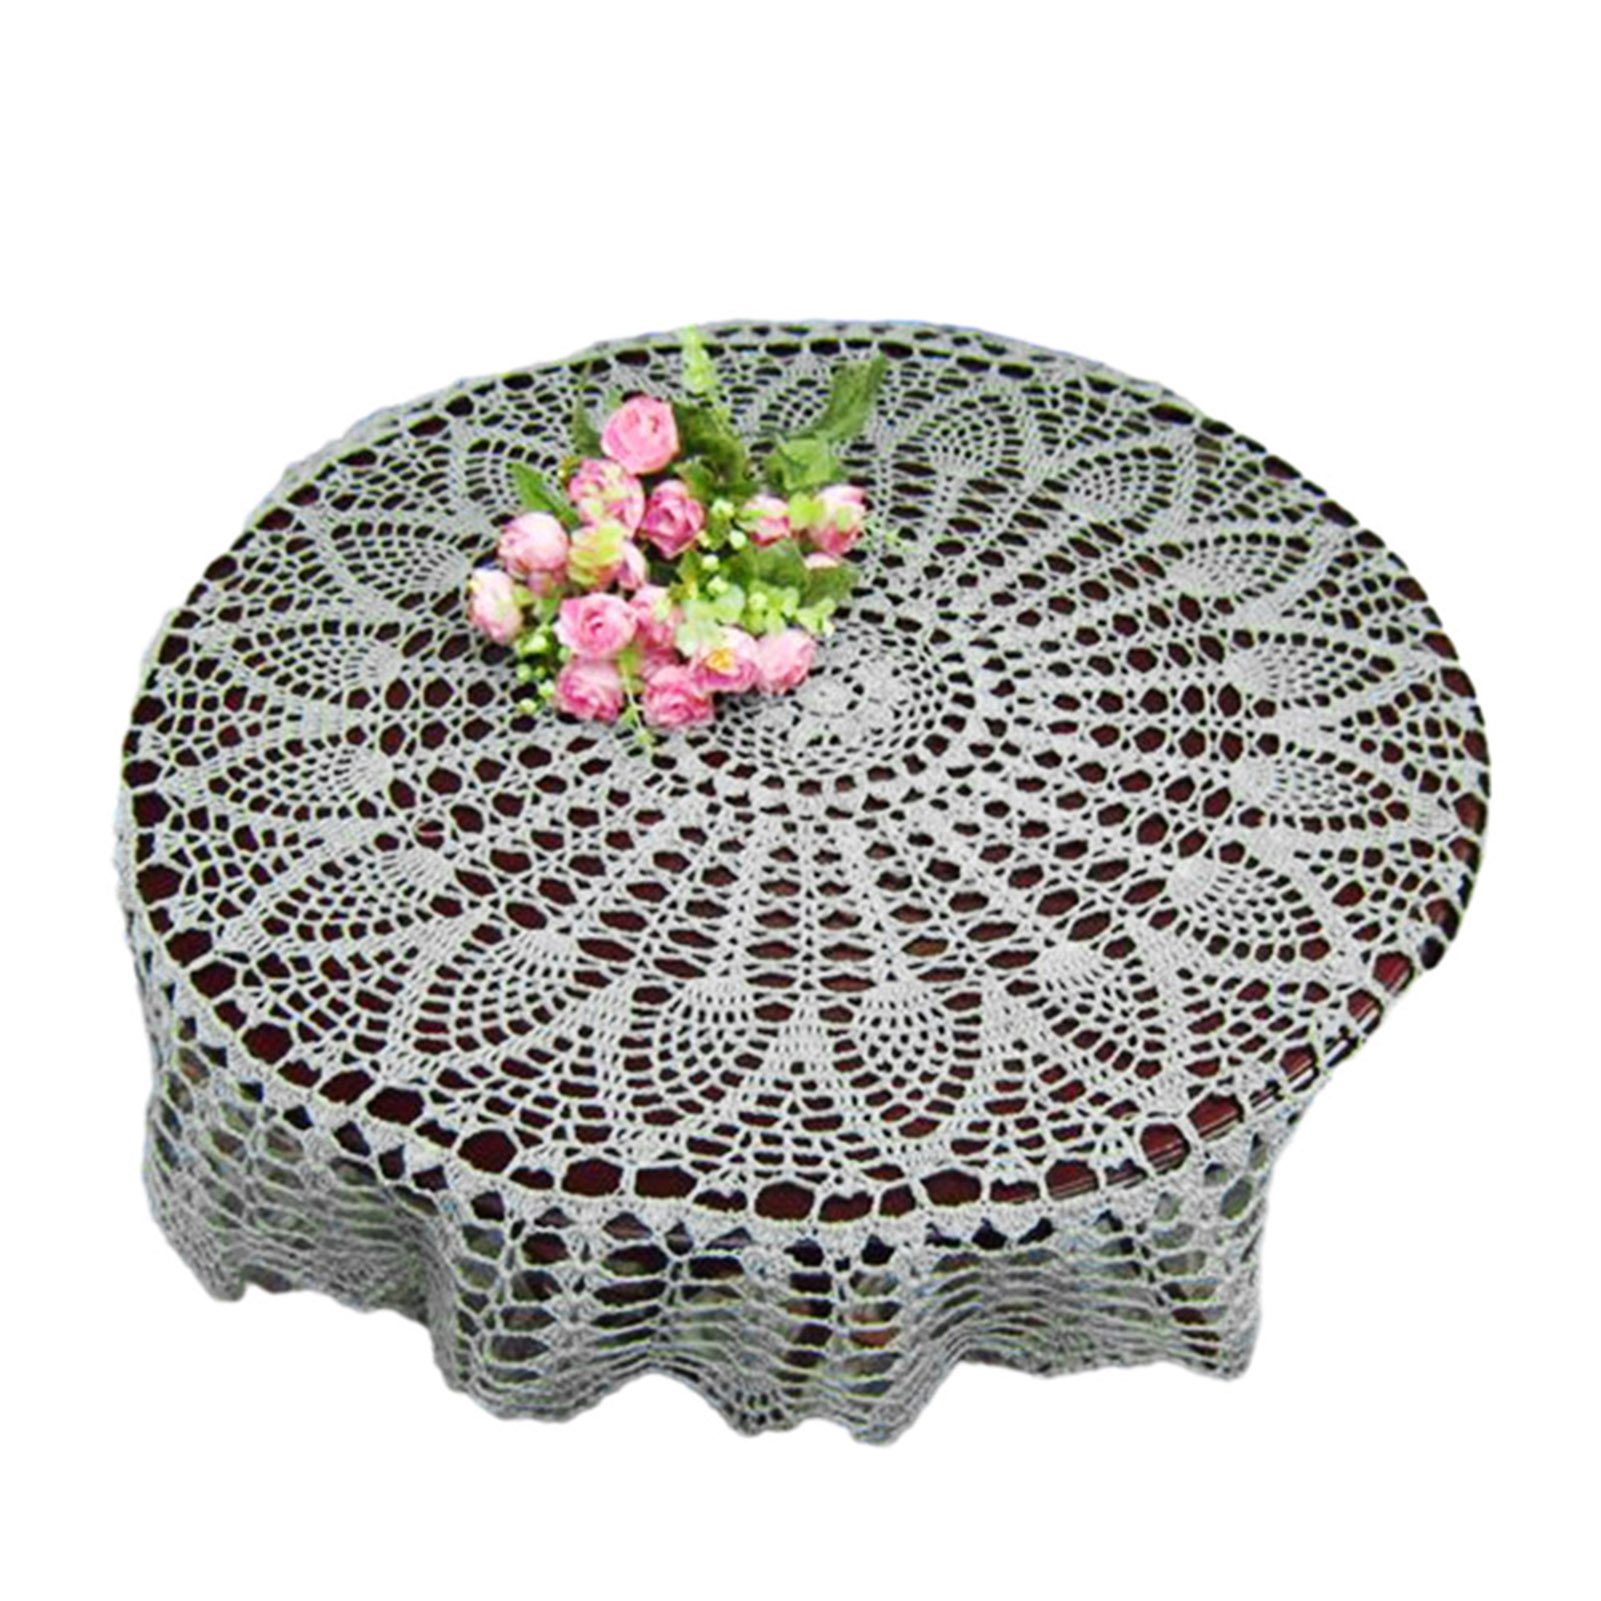 Details about   Vintage Hand Crochet Lace Tablecloth Dining Table Cloth Cover Wedding Home Decor 